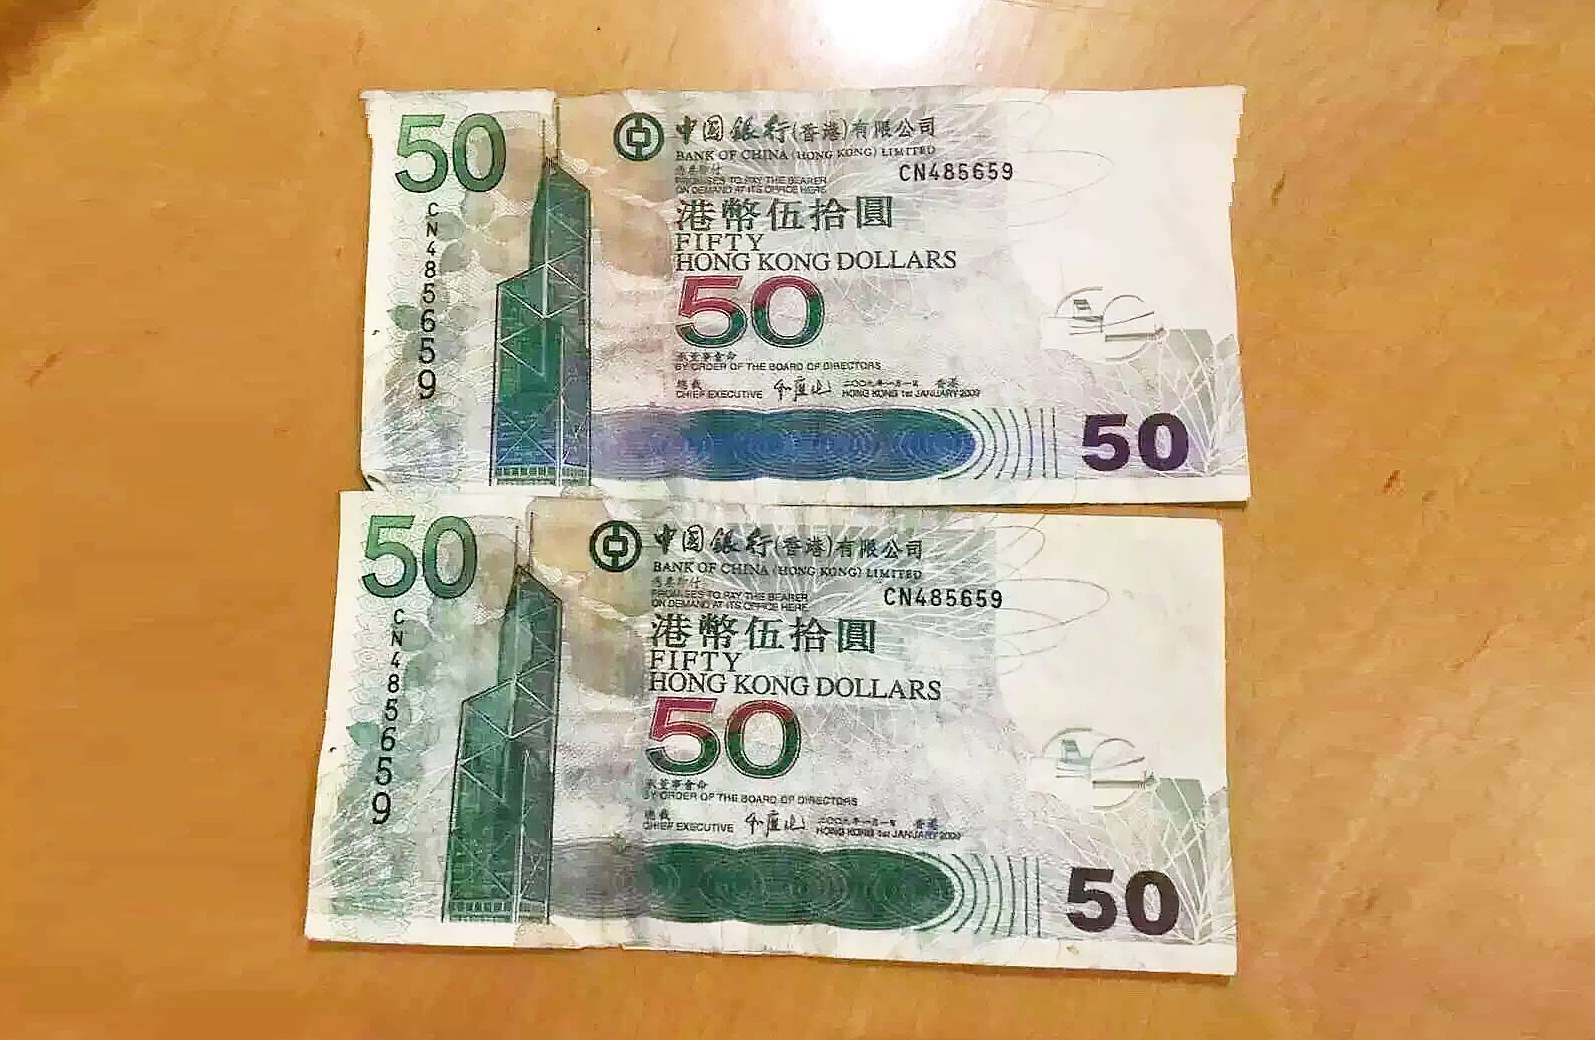 Watch Out For Fake Hk 50 Notes Bank Of China Hong Kong Warns Public - watch out for fake hk 50 notes bank of china hong kong warns public south china morning post